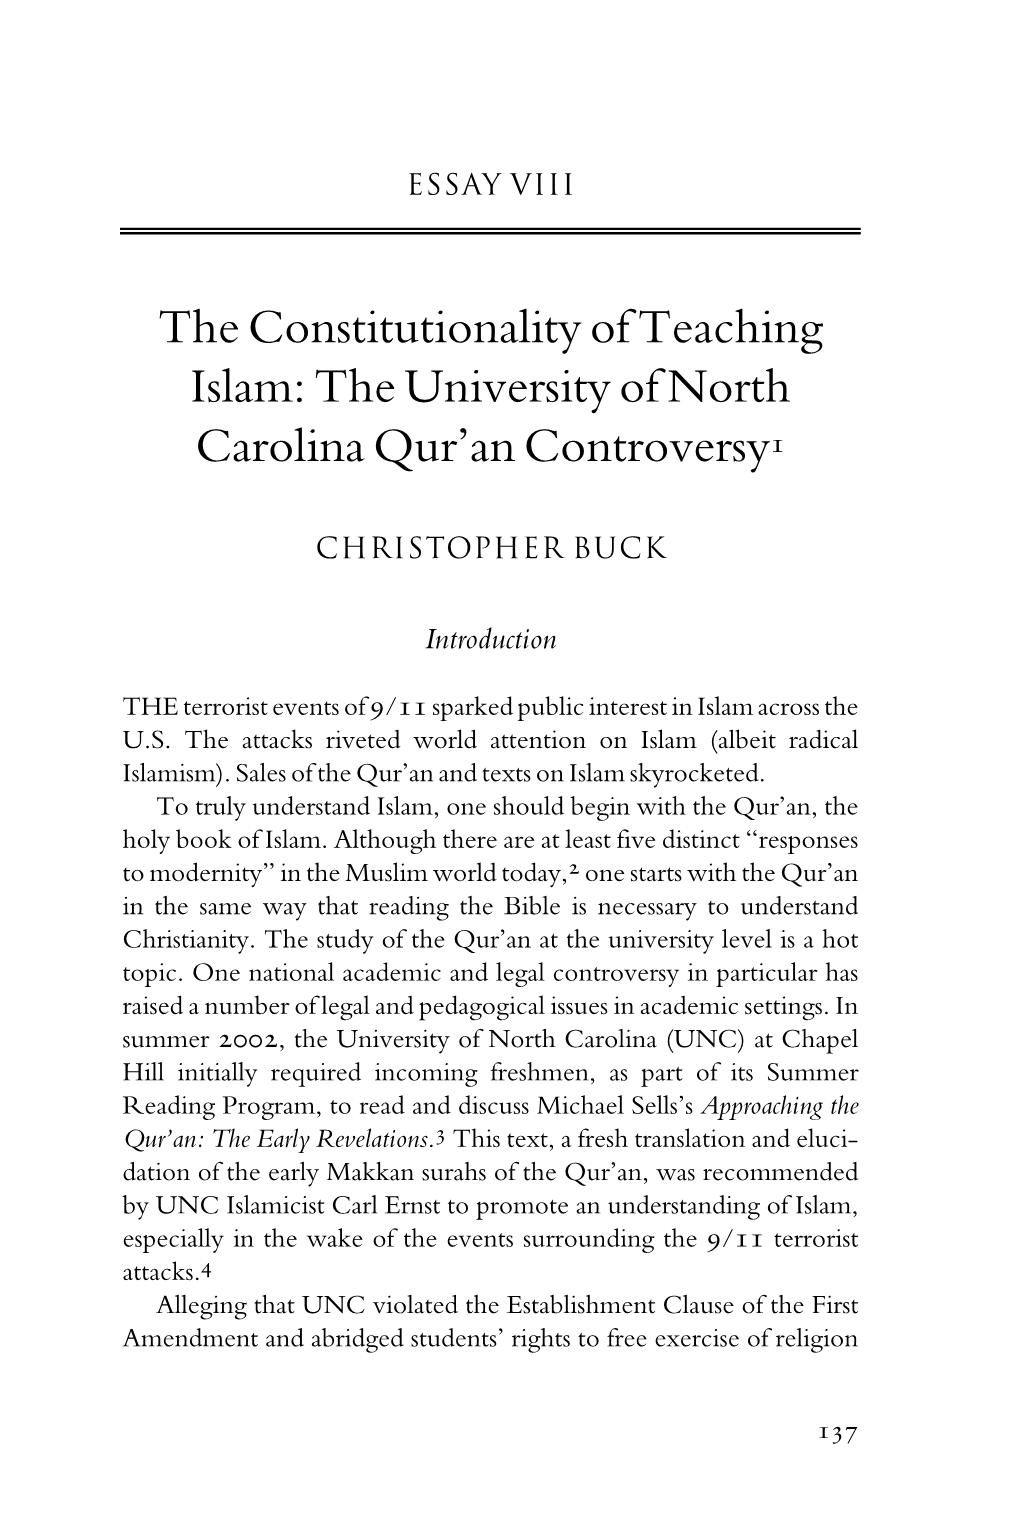 The Constitutionality of Teaching Islam: the University of North Carolina Qur’An Controversy 1